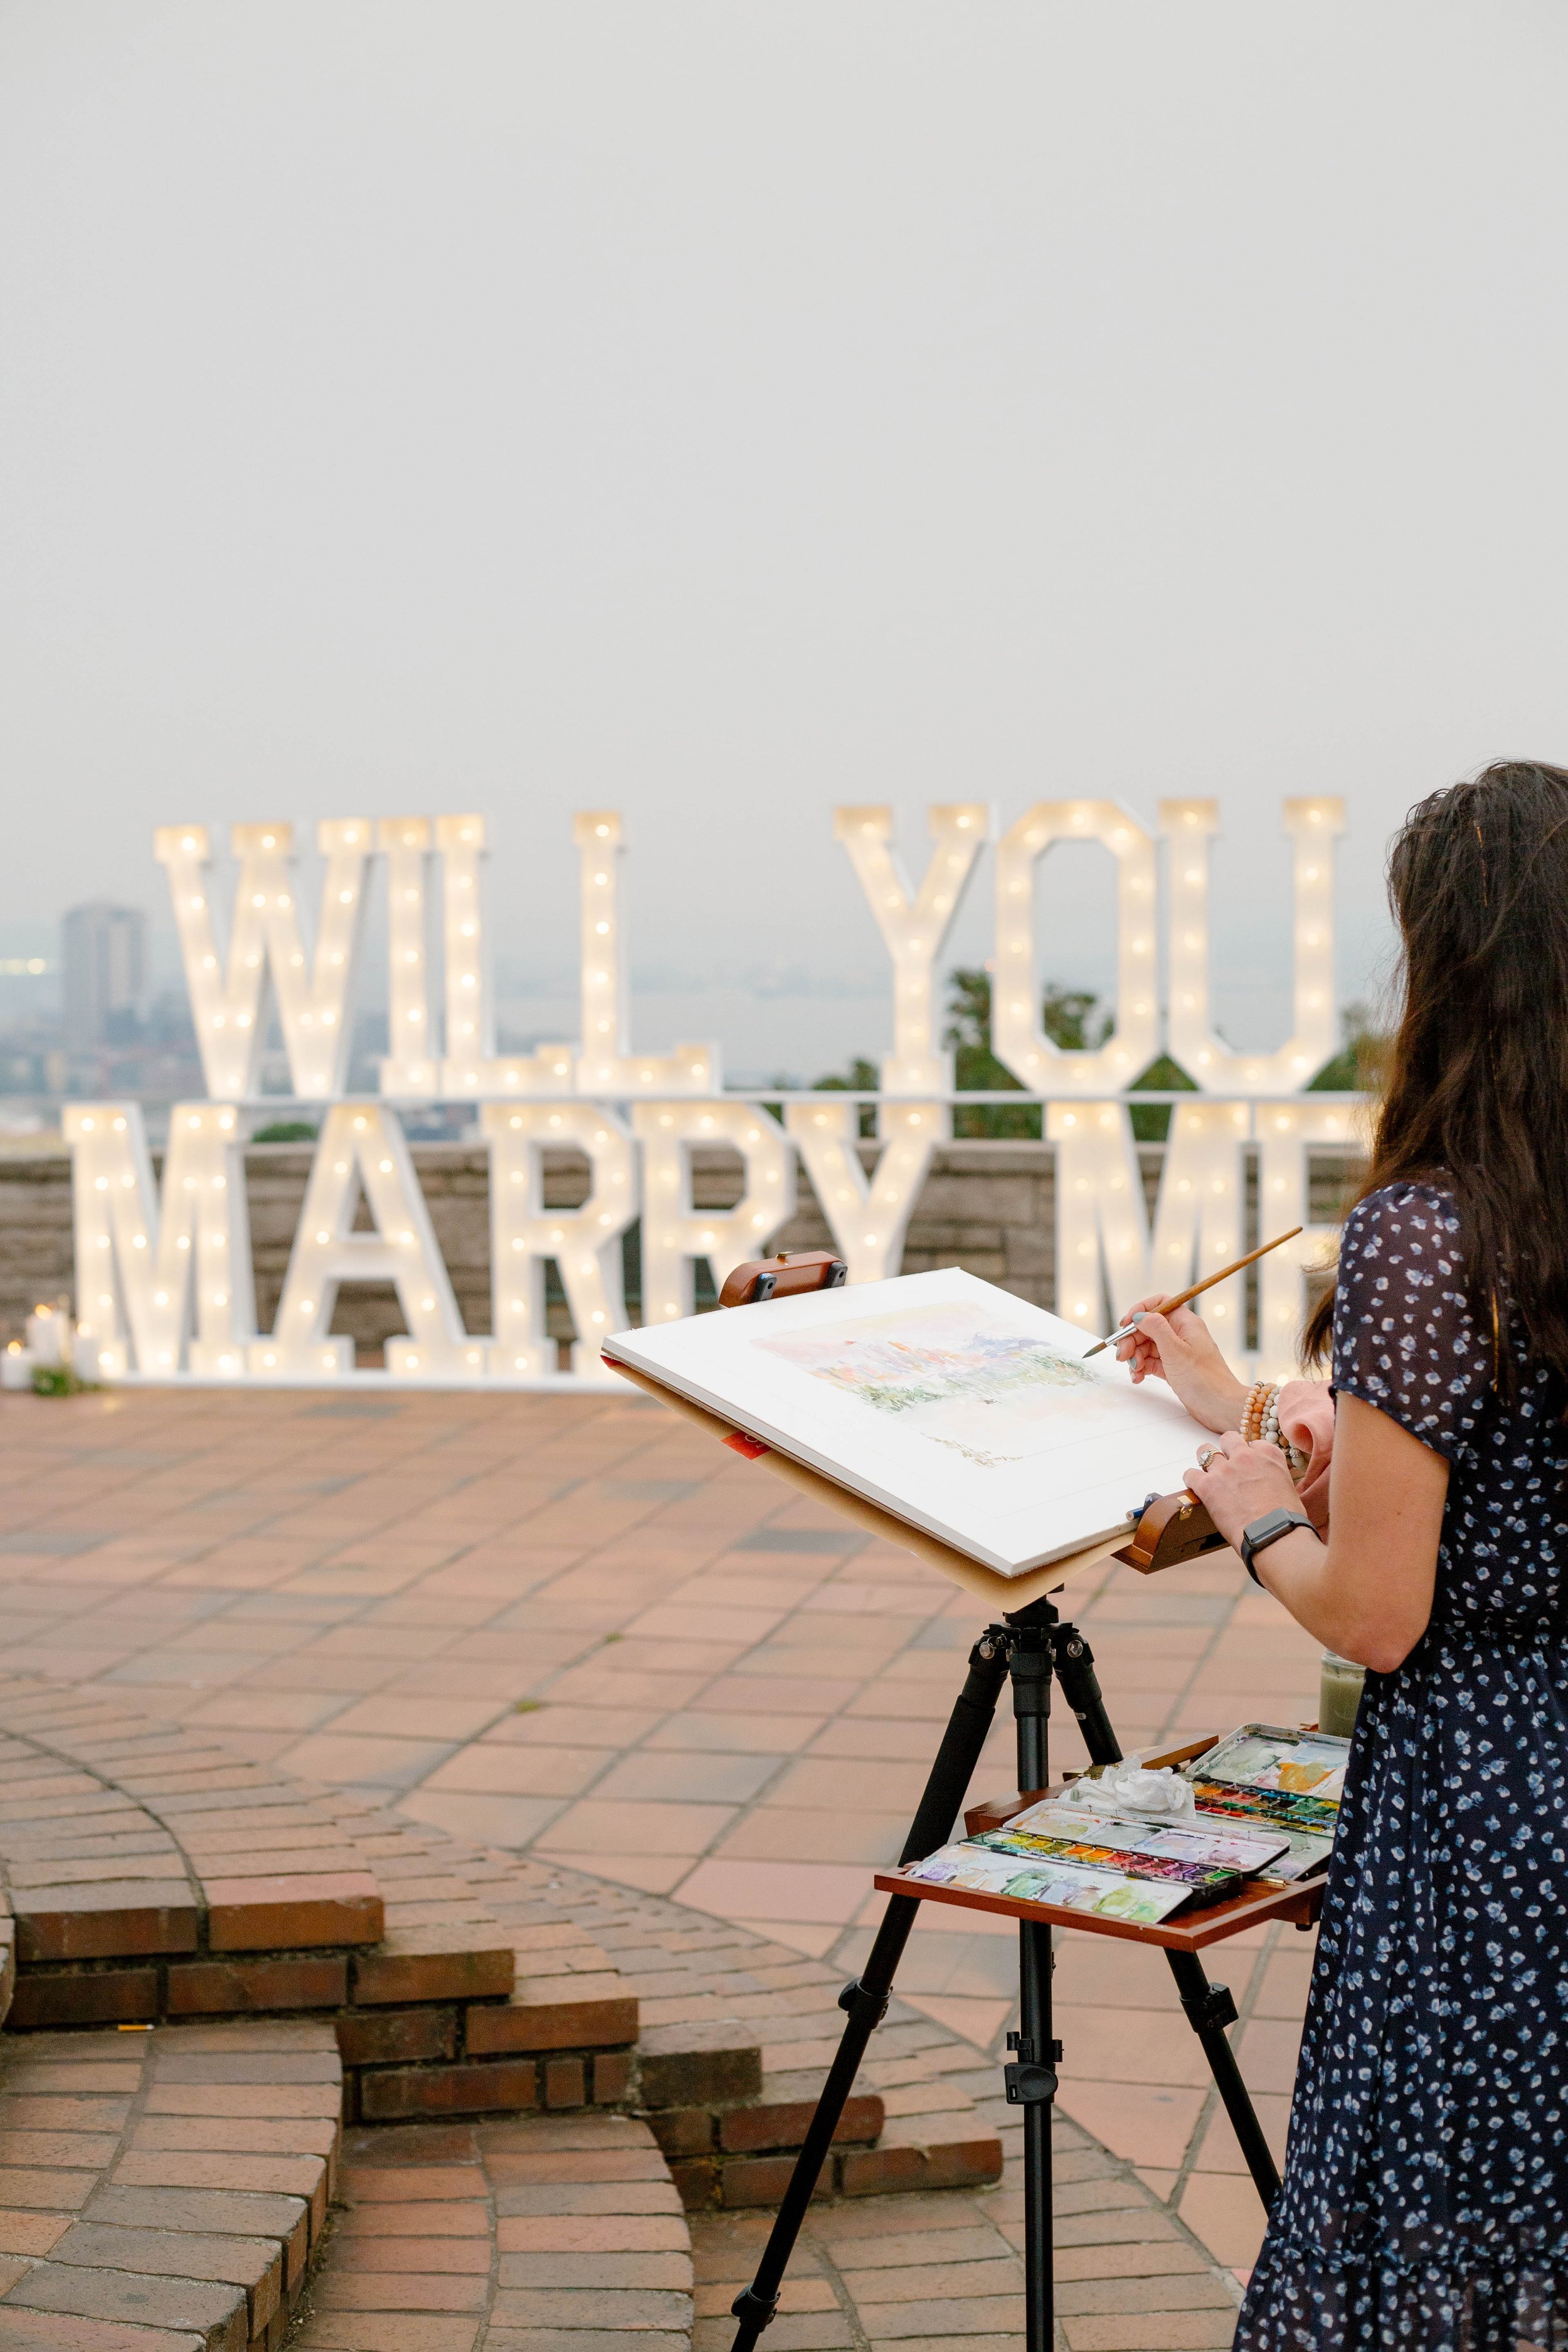 pacific-engagements-paige-lindsey-design-kerry-jeanne-photography-a-to-z-marquee-letter-rental-seattle-kerry-park-engagement